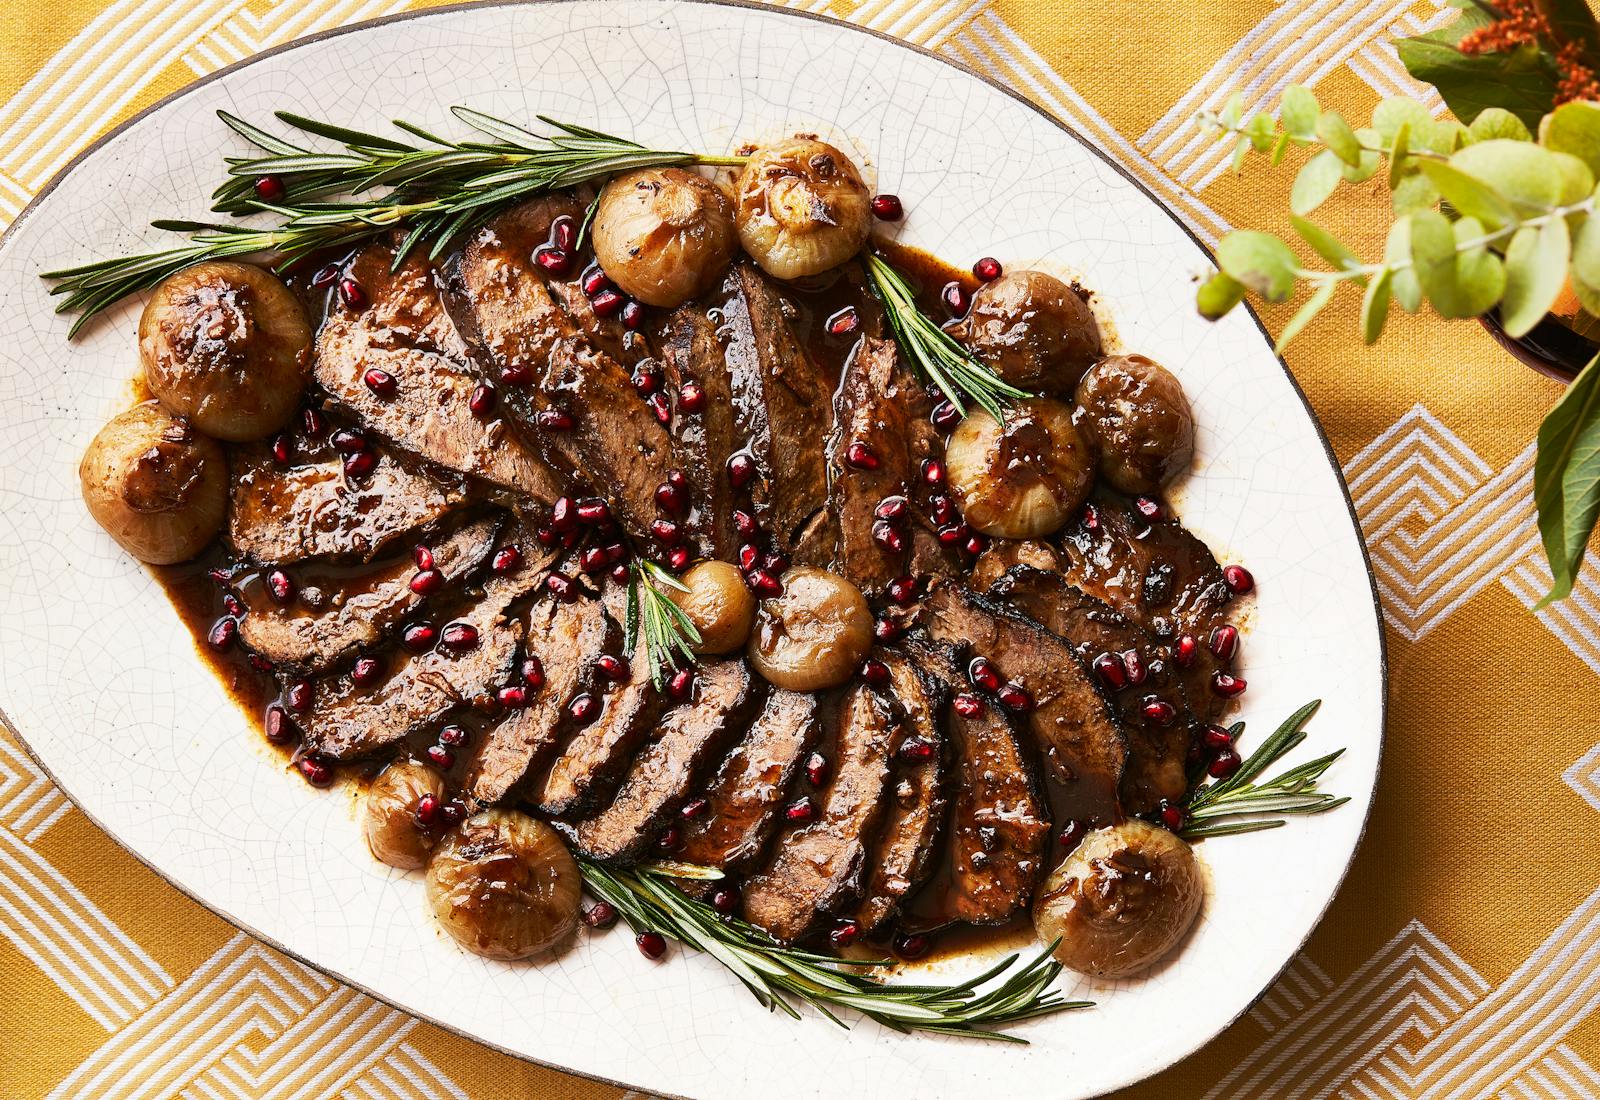 Sliced chuck roast on serving platter, garnished with rosemary.